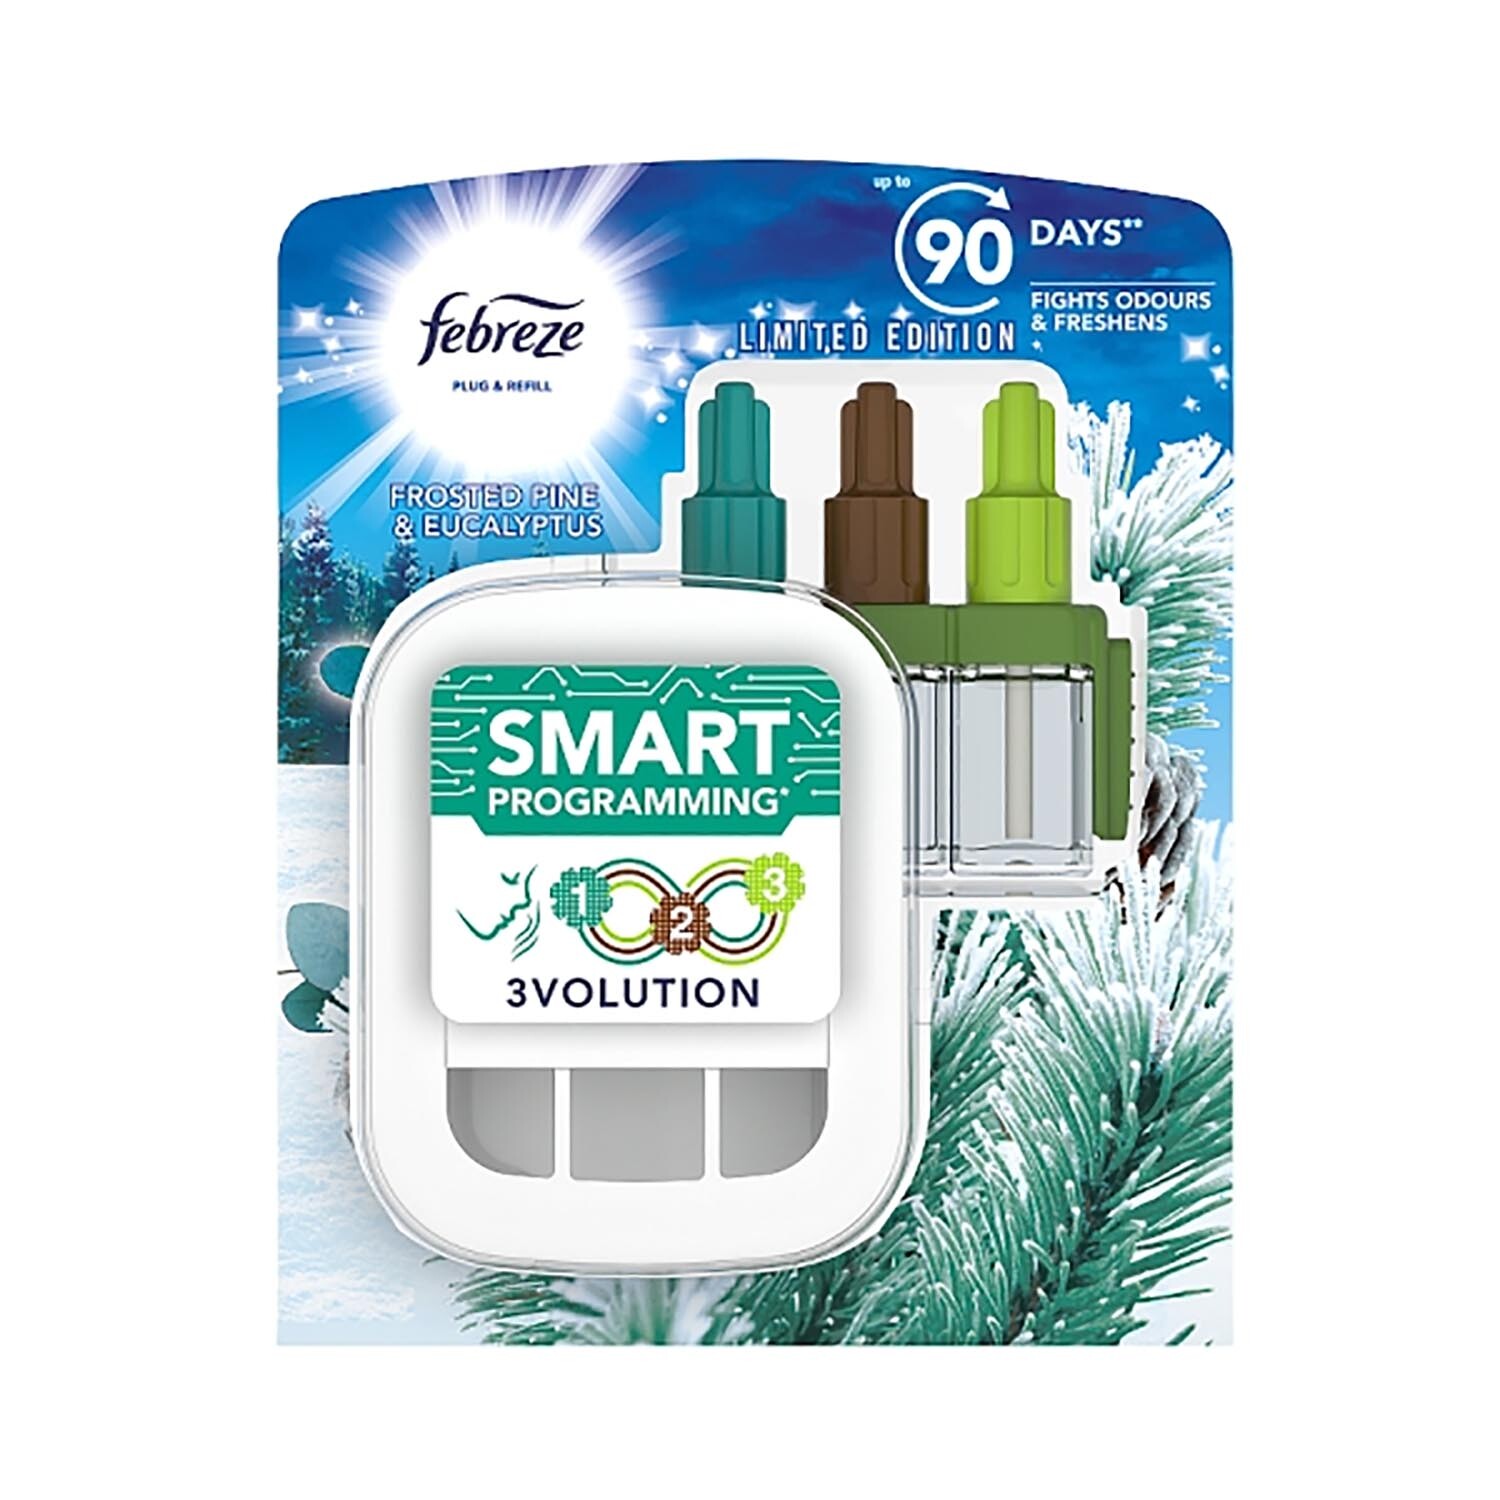 Ambi Pur 3Volution Air Plug In Starter Kit - Frosted Pine and Eucalyptus Image